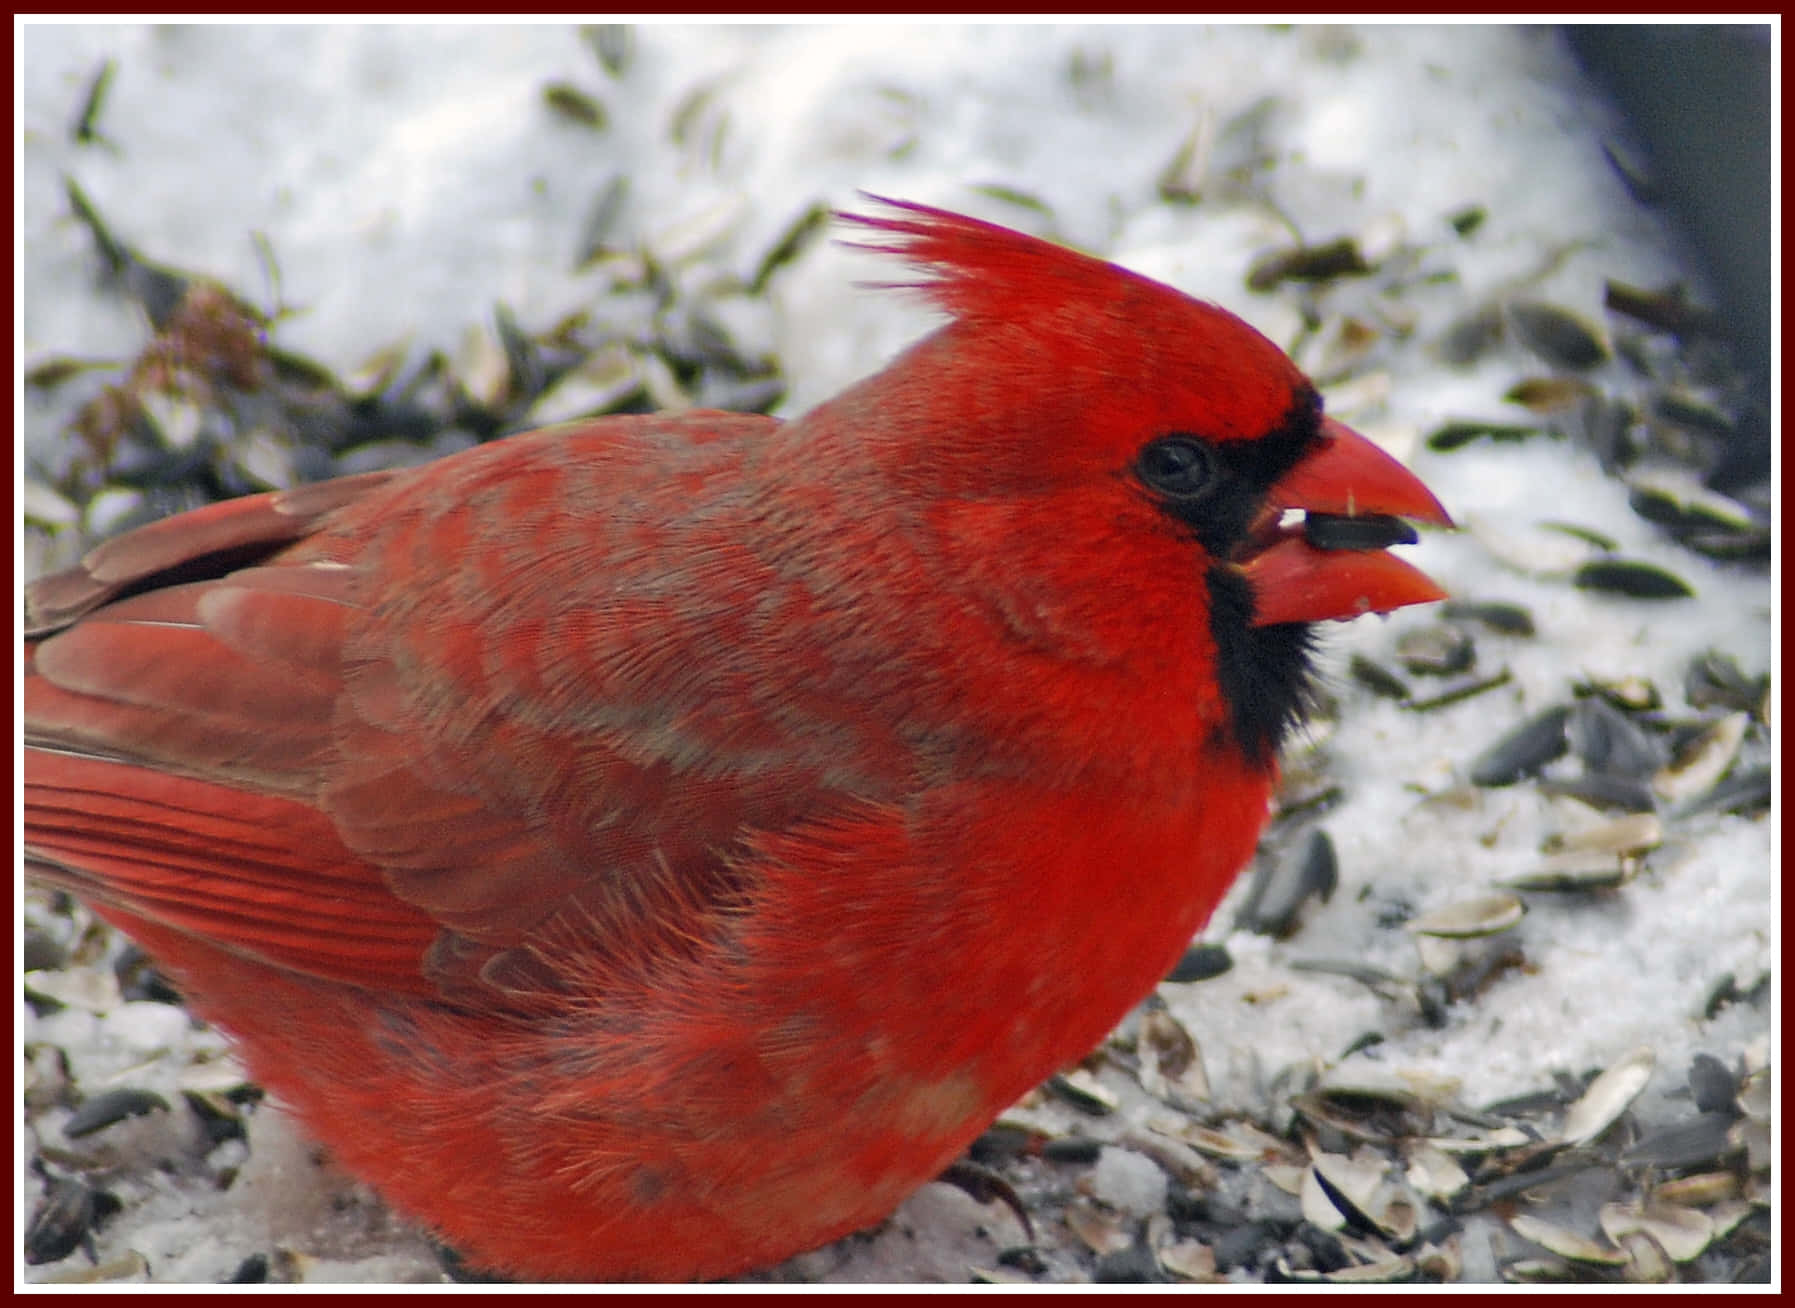 Bright Red Cardinal in a Row of Pine Cones